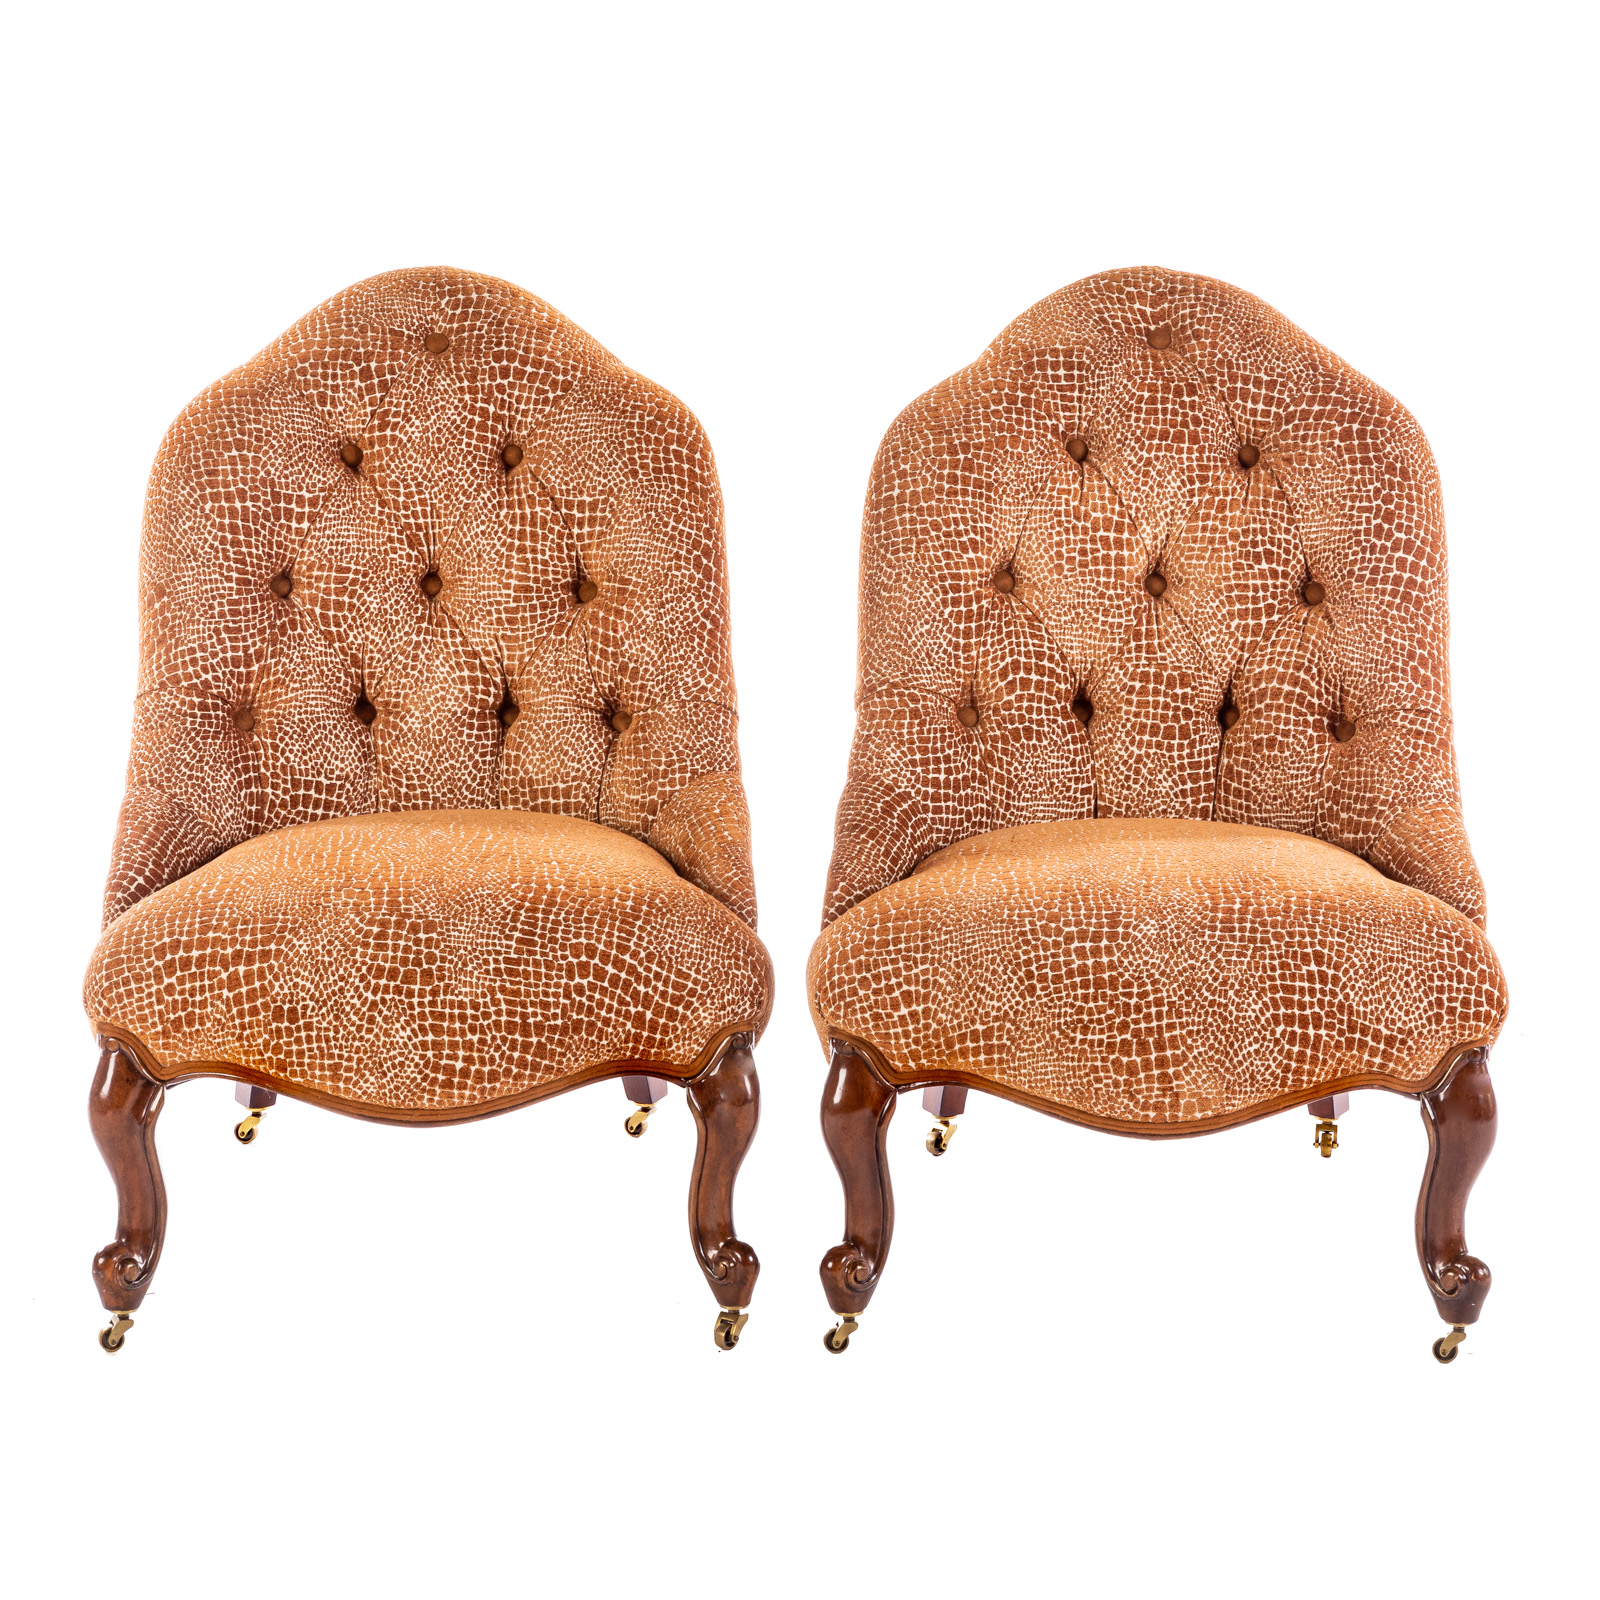 A PAIR OF VICTORIAN STYLE UPHOLSTERED